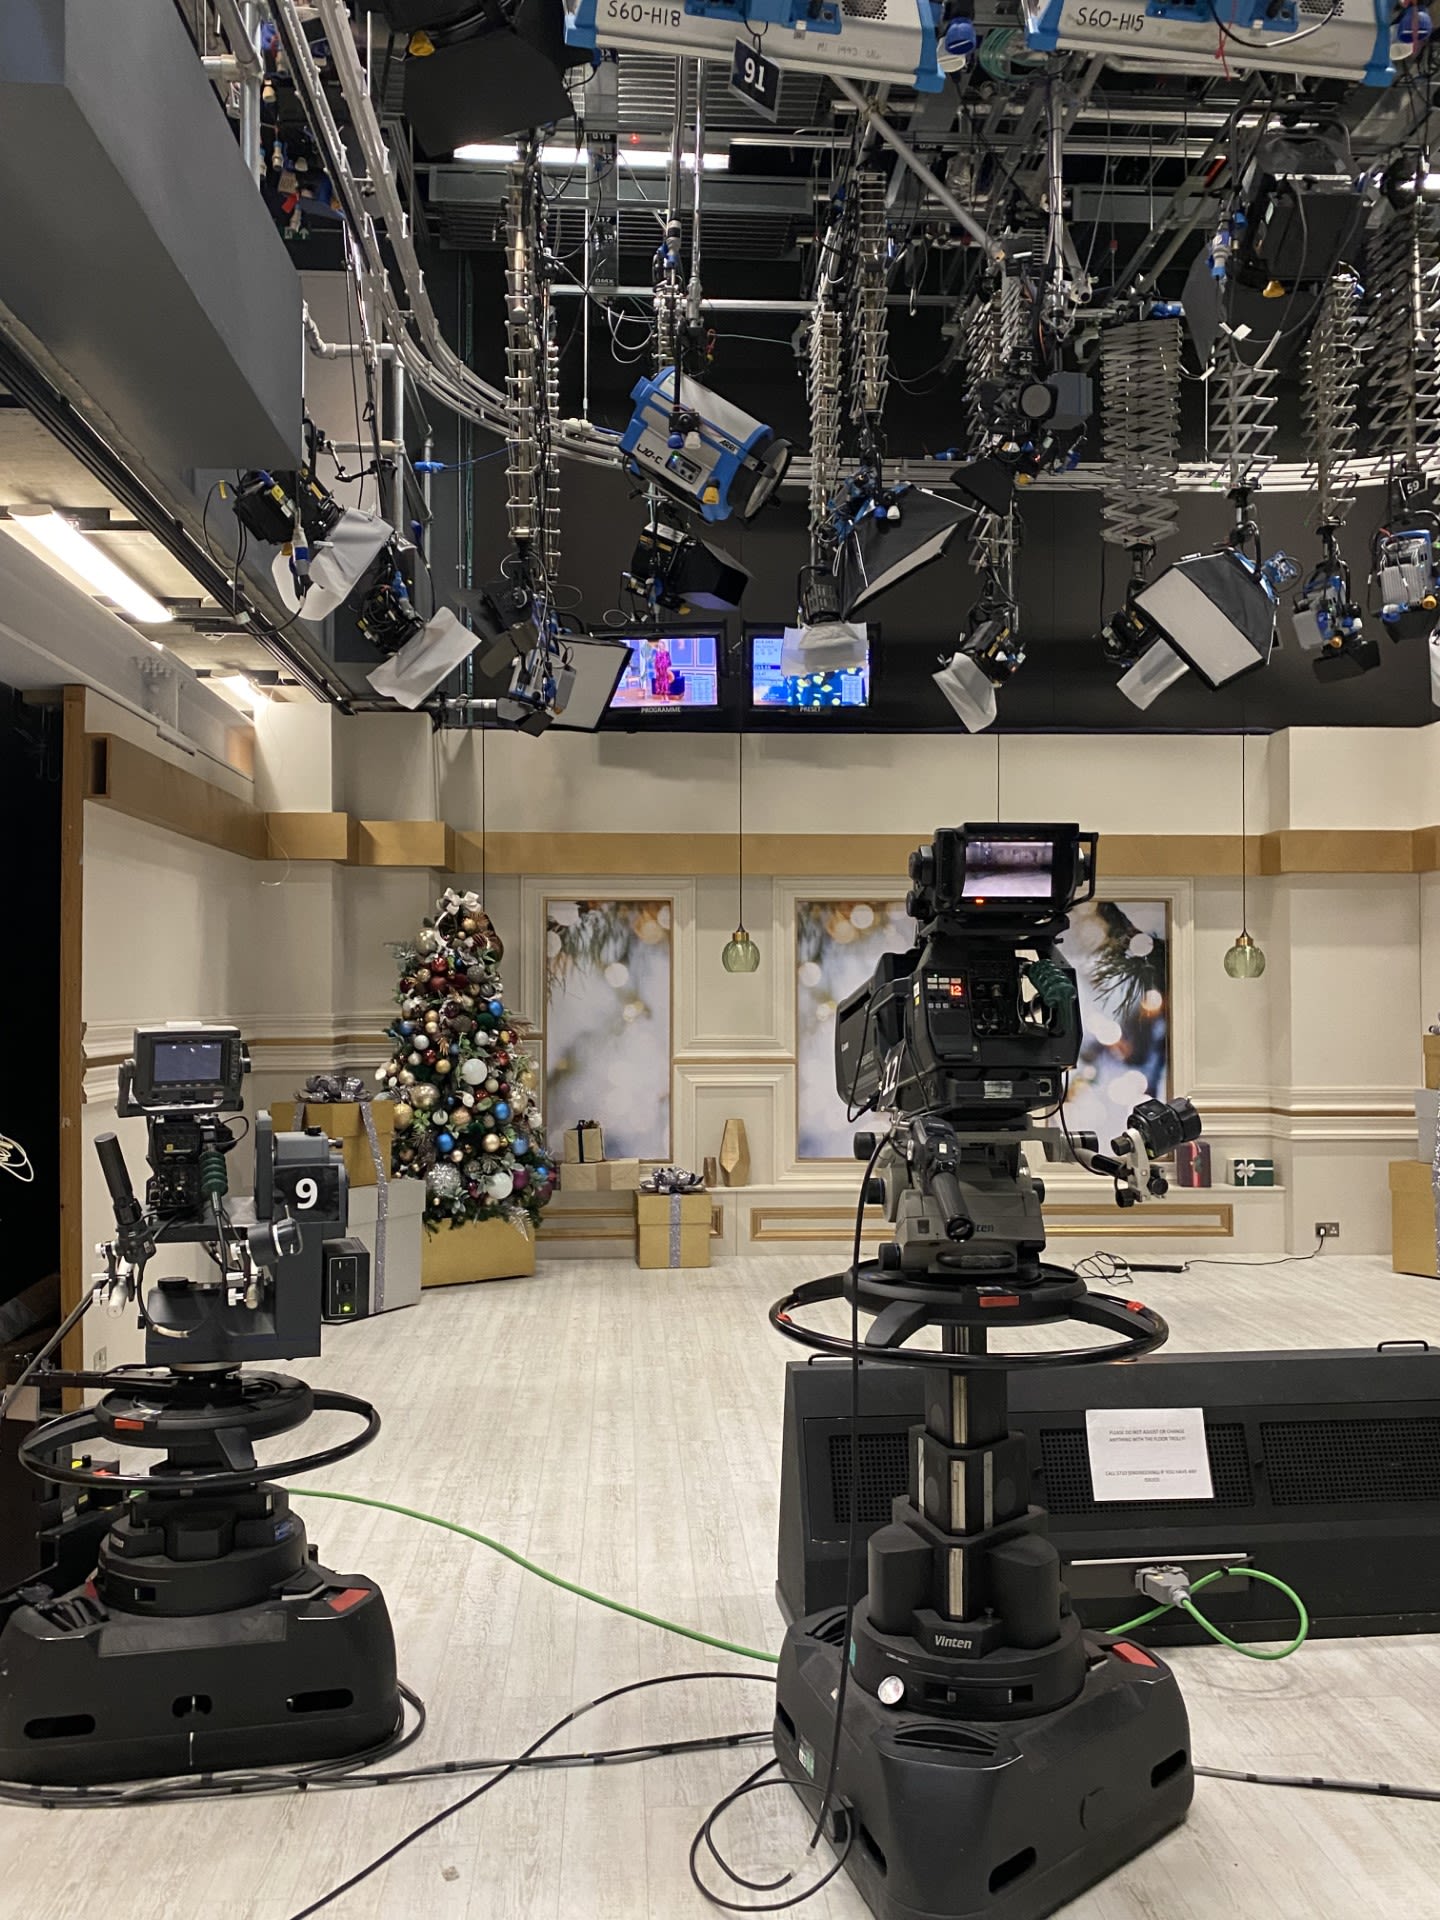 View of the QVC set and cameras.